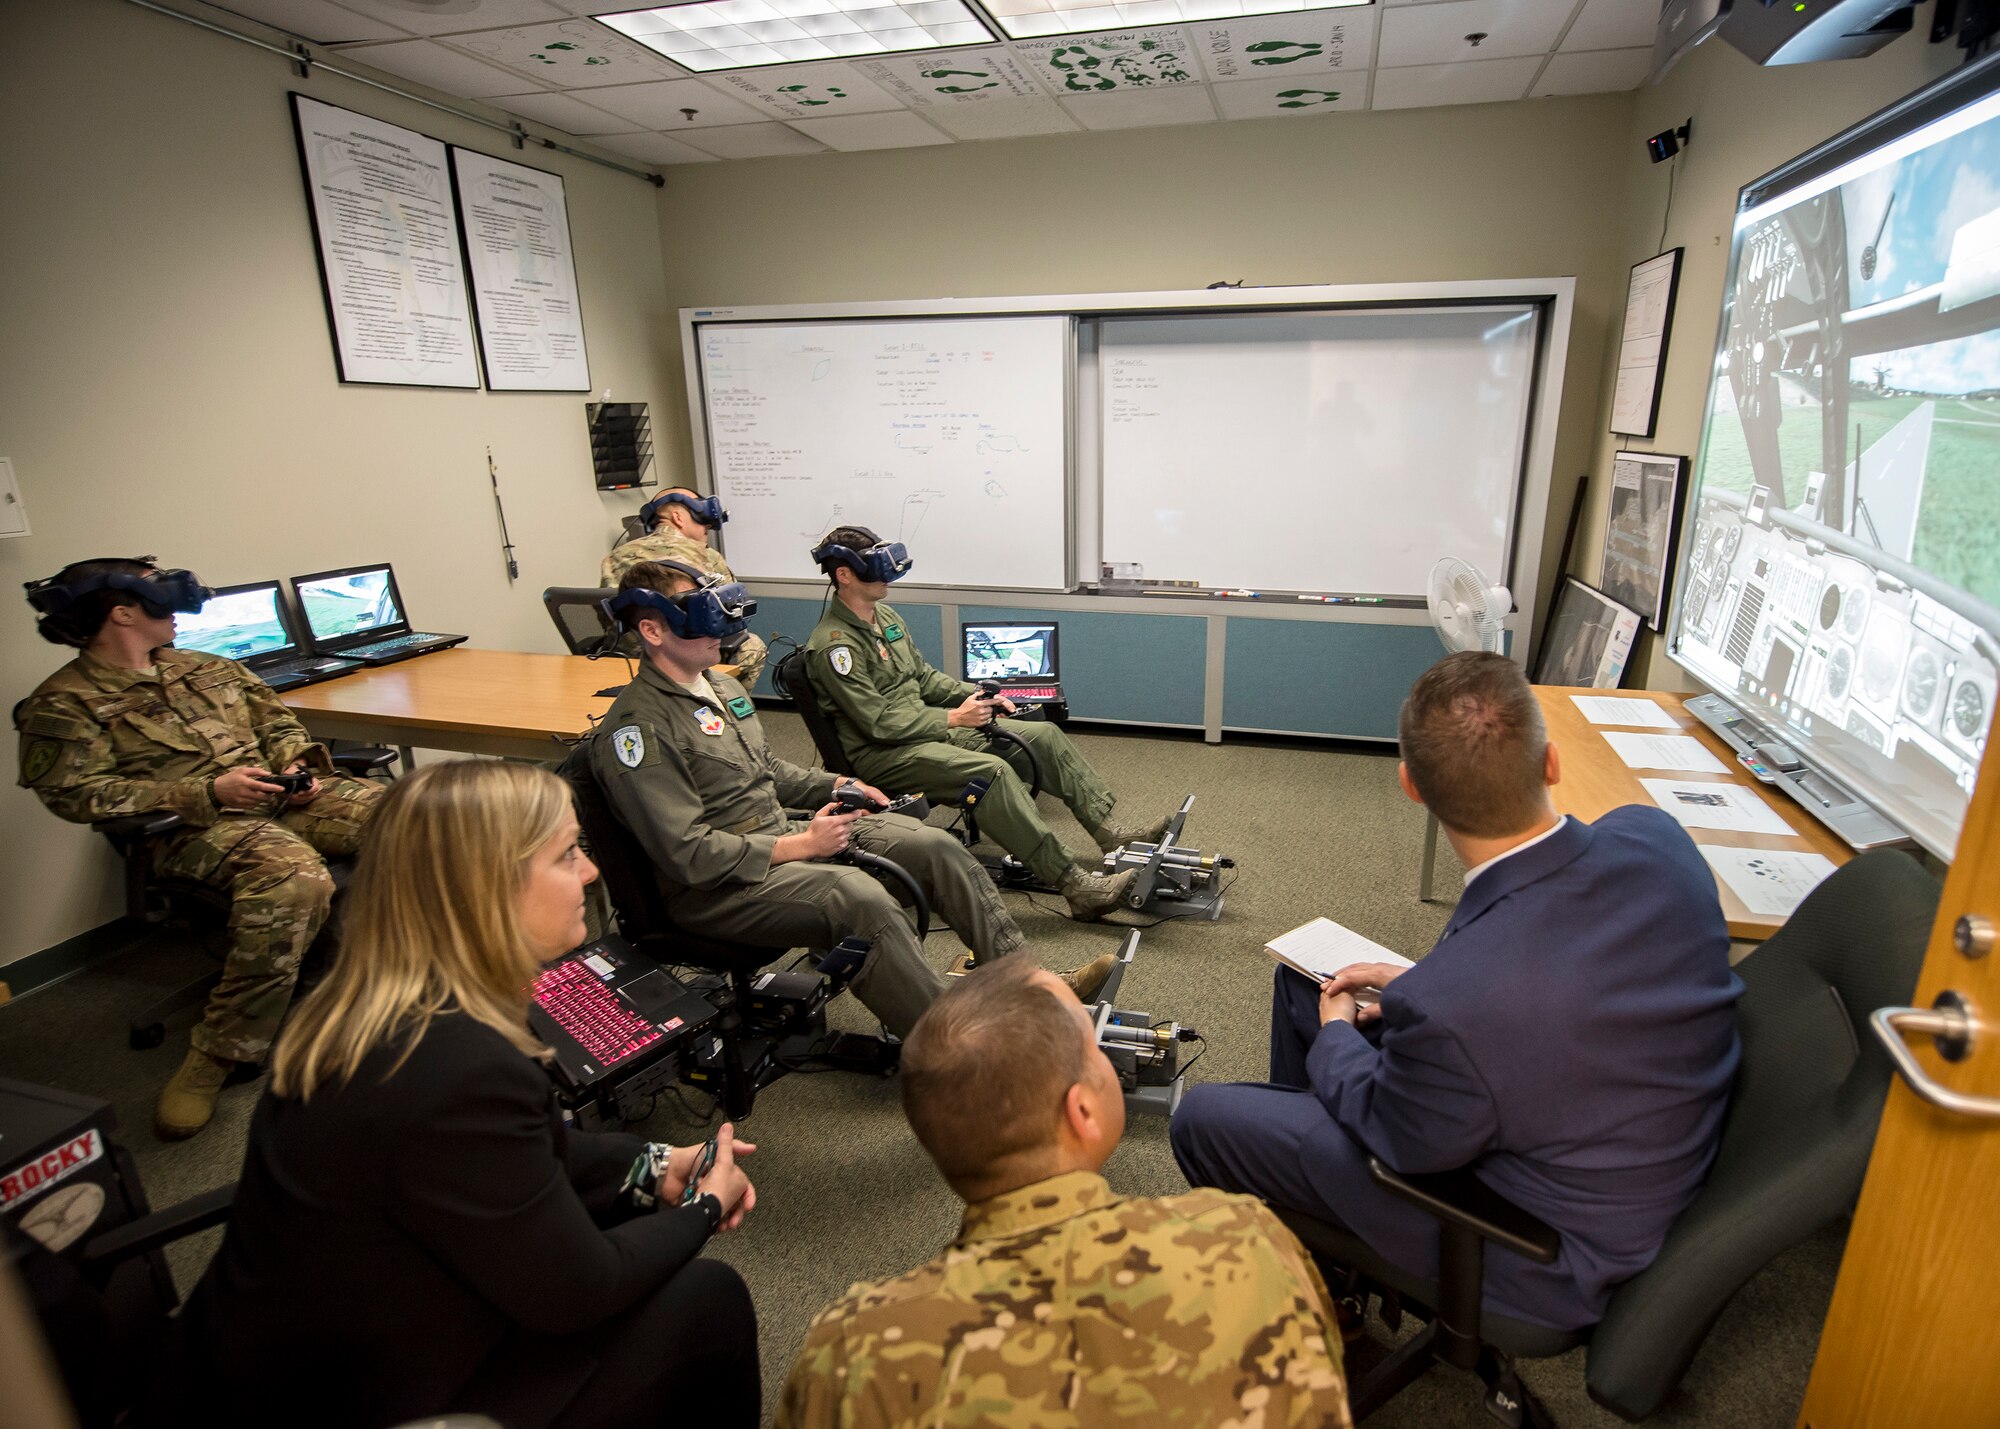 Pilots and Special Mission Aviators from the 41st Rescue Squadron (RQS), demonstrate their virtual reality flight simulator, May 16, 2019, at Moody Air Force Base, Ga. Dr. John Matyjas and Dr. Donna Joyce visited the 41st RQS to tour and assess their Virtual Reality flight simulator along with taking a fam flight on an HH-60G Pave Hawk. The visit is a part of an Air Force assessment of the possible implementation of VR in training. The 41st RQS VR flight simulator is an initiative that was selected at the Moody Air Force Base 2018 Spark Tank competition. (U.S. Air Force photo by Airman 1st Class Eugene Oliver)